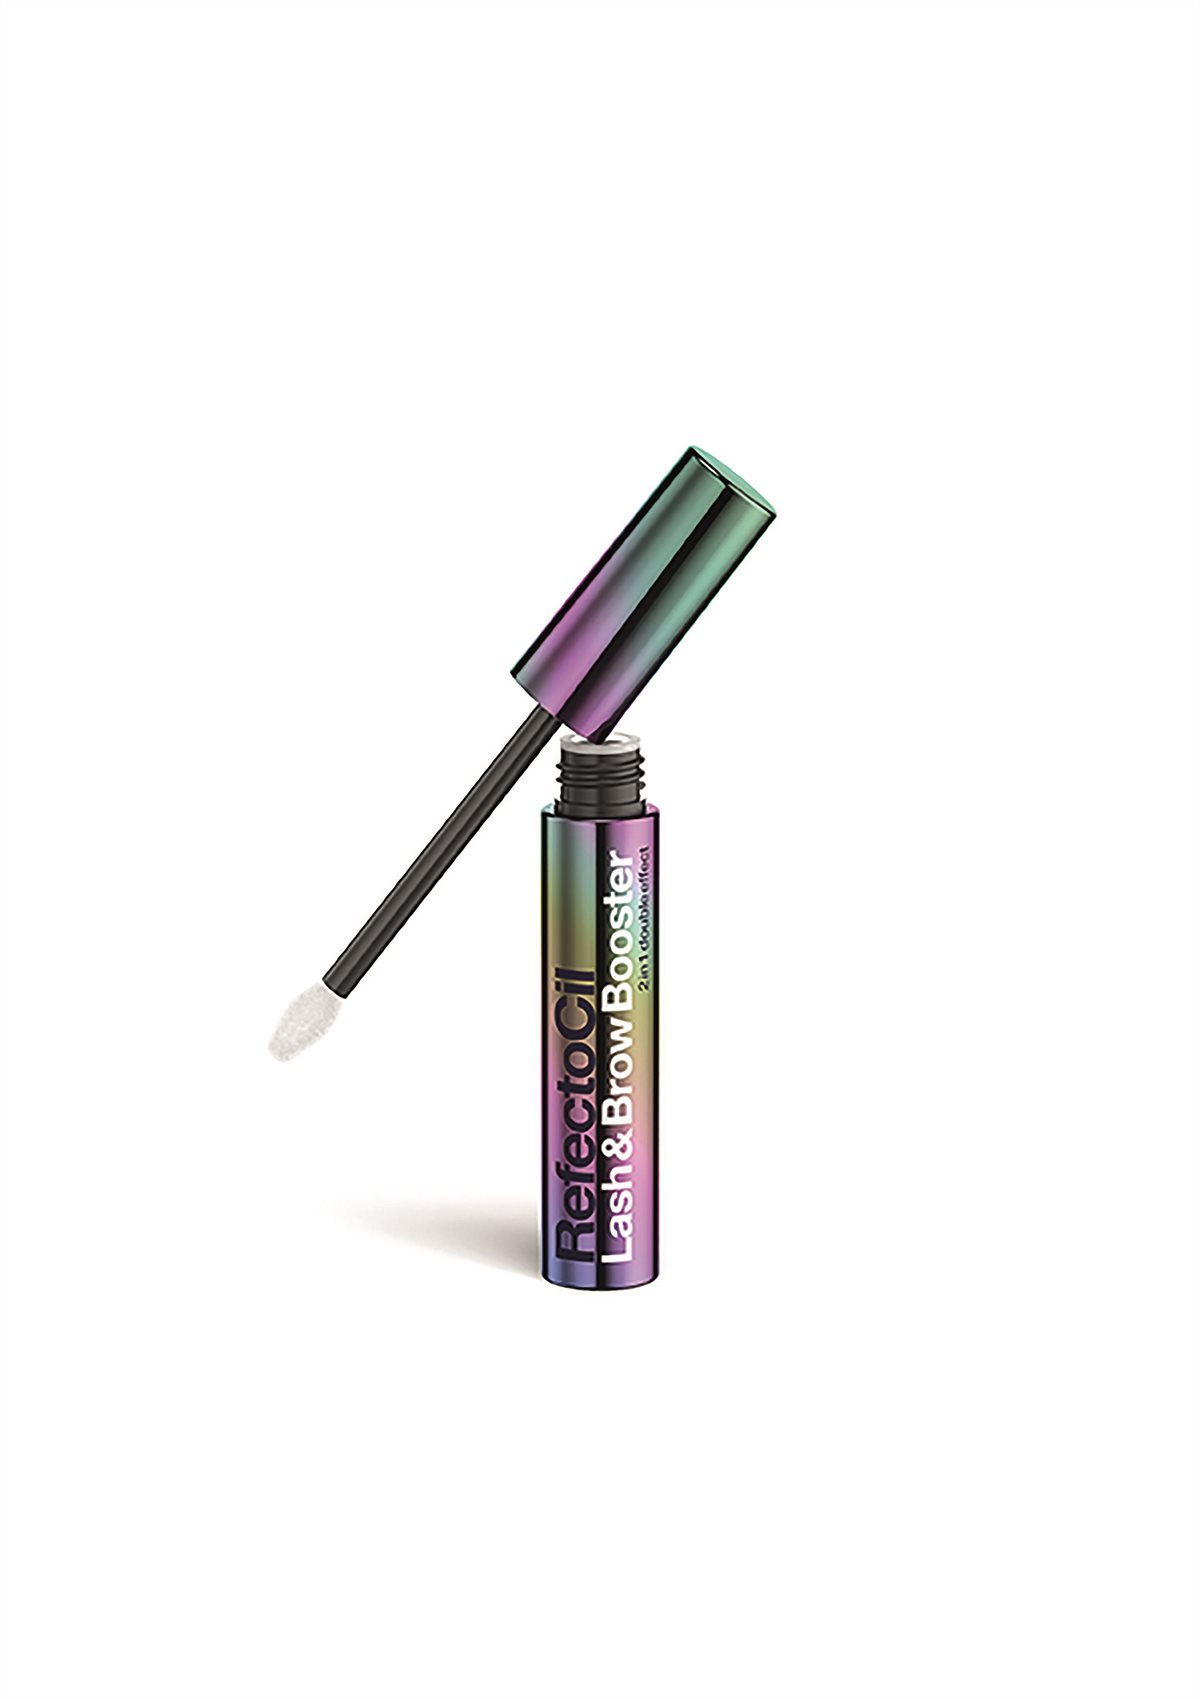 RefectoCil Lash & Brow Booster offen